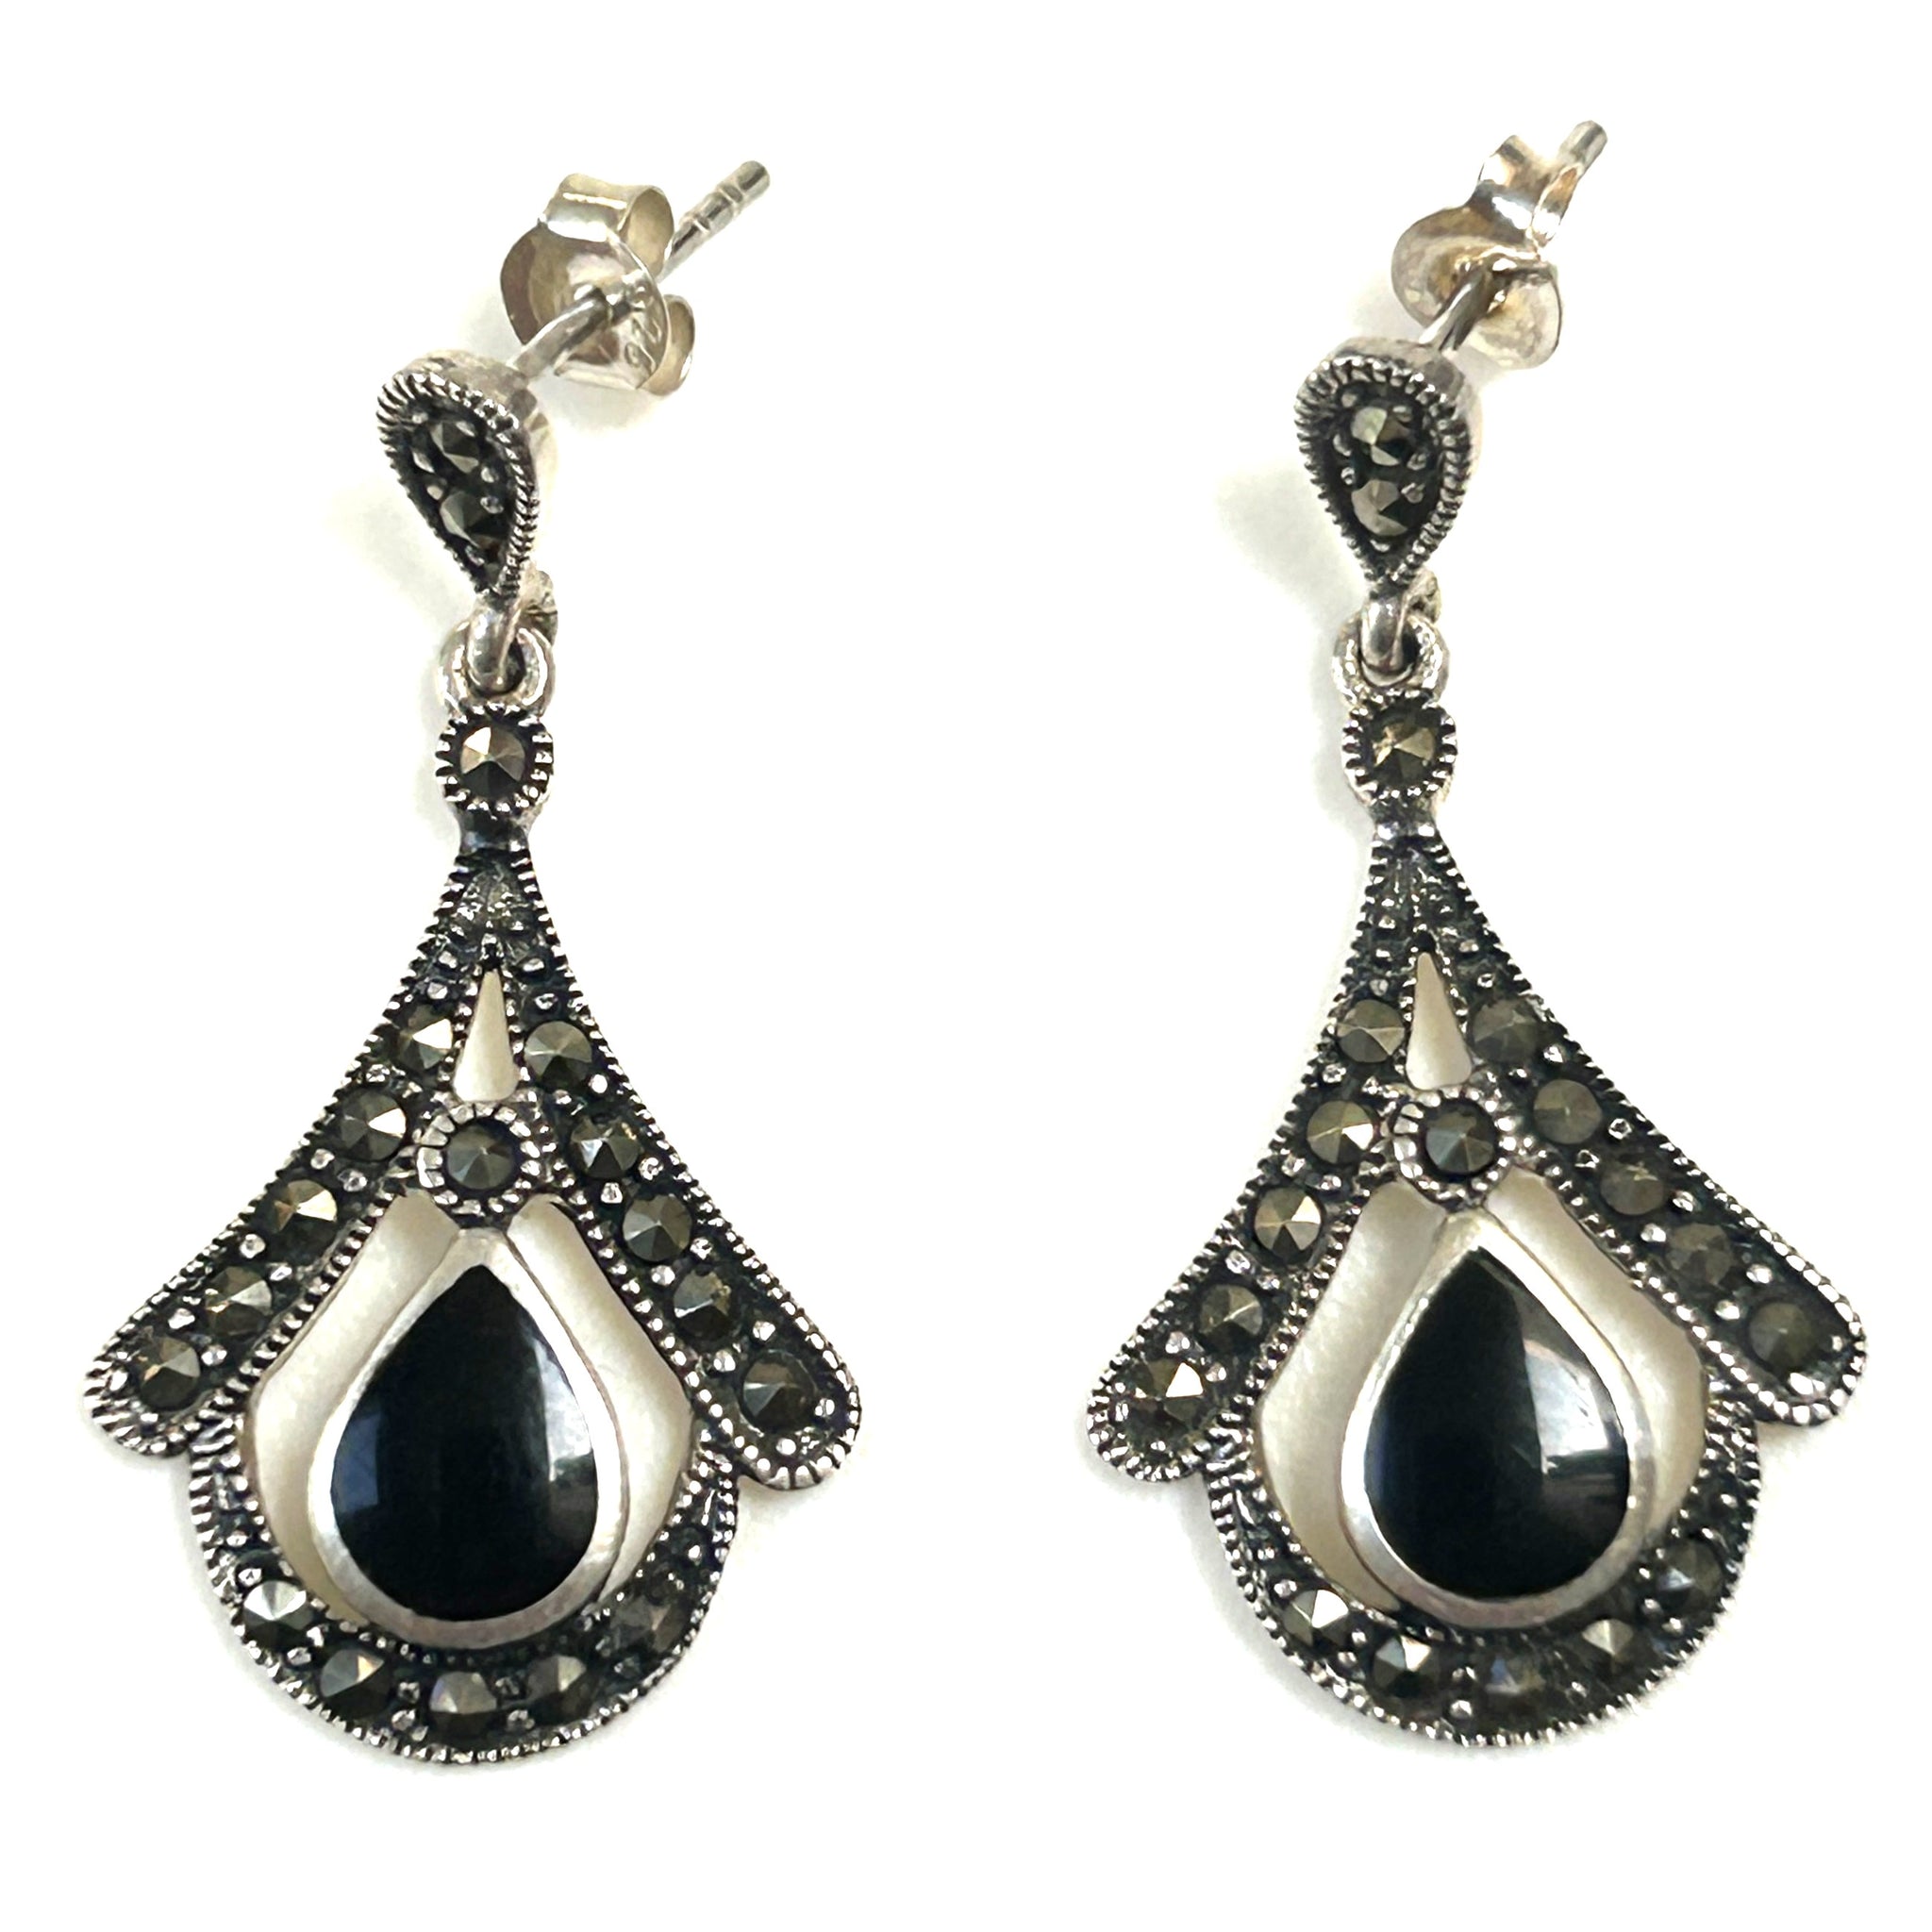 Sterling Silver, Onyx, and Marcasite Earrings